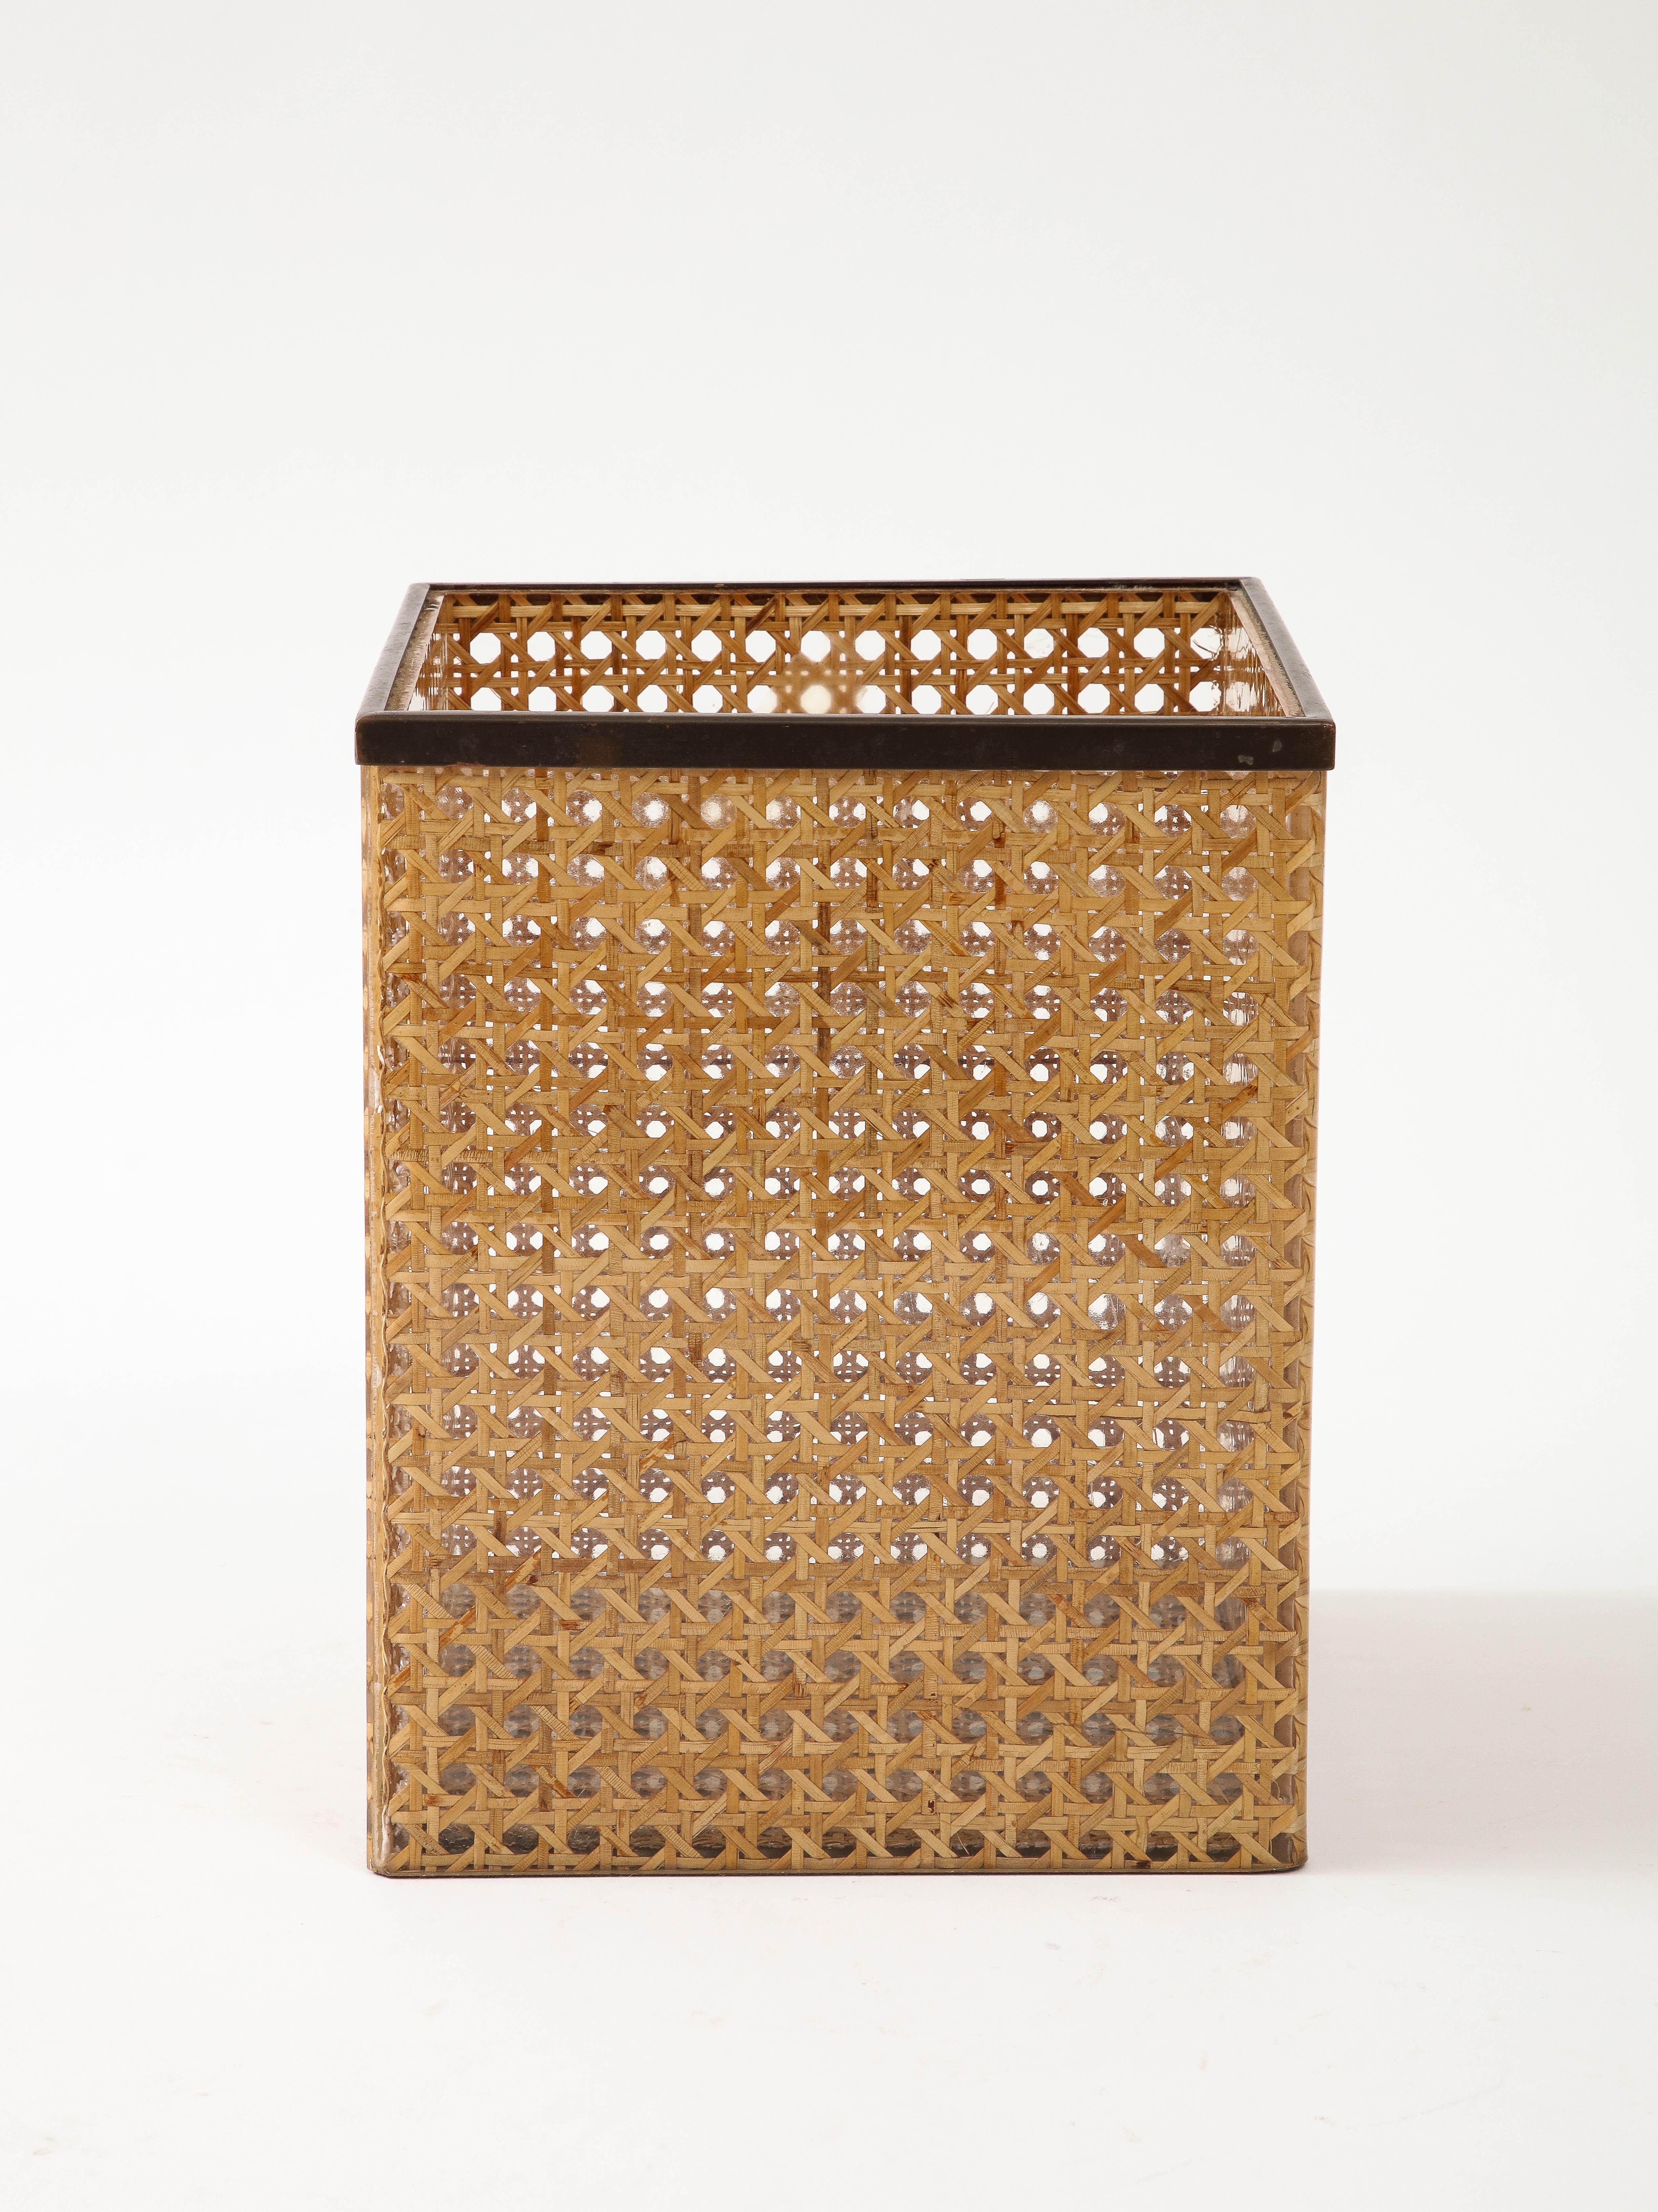 Christian Dior Home Lucite, Bronze, and Cane Bin, 1970
H: 9.75 D: 11.75 W: 11.75